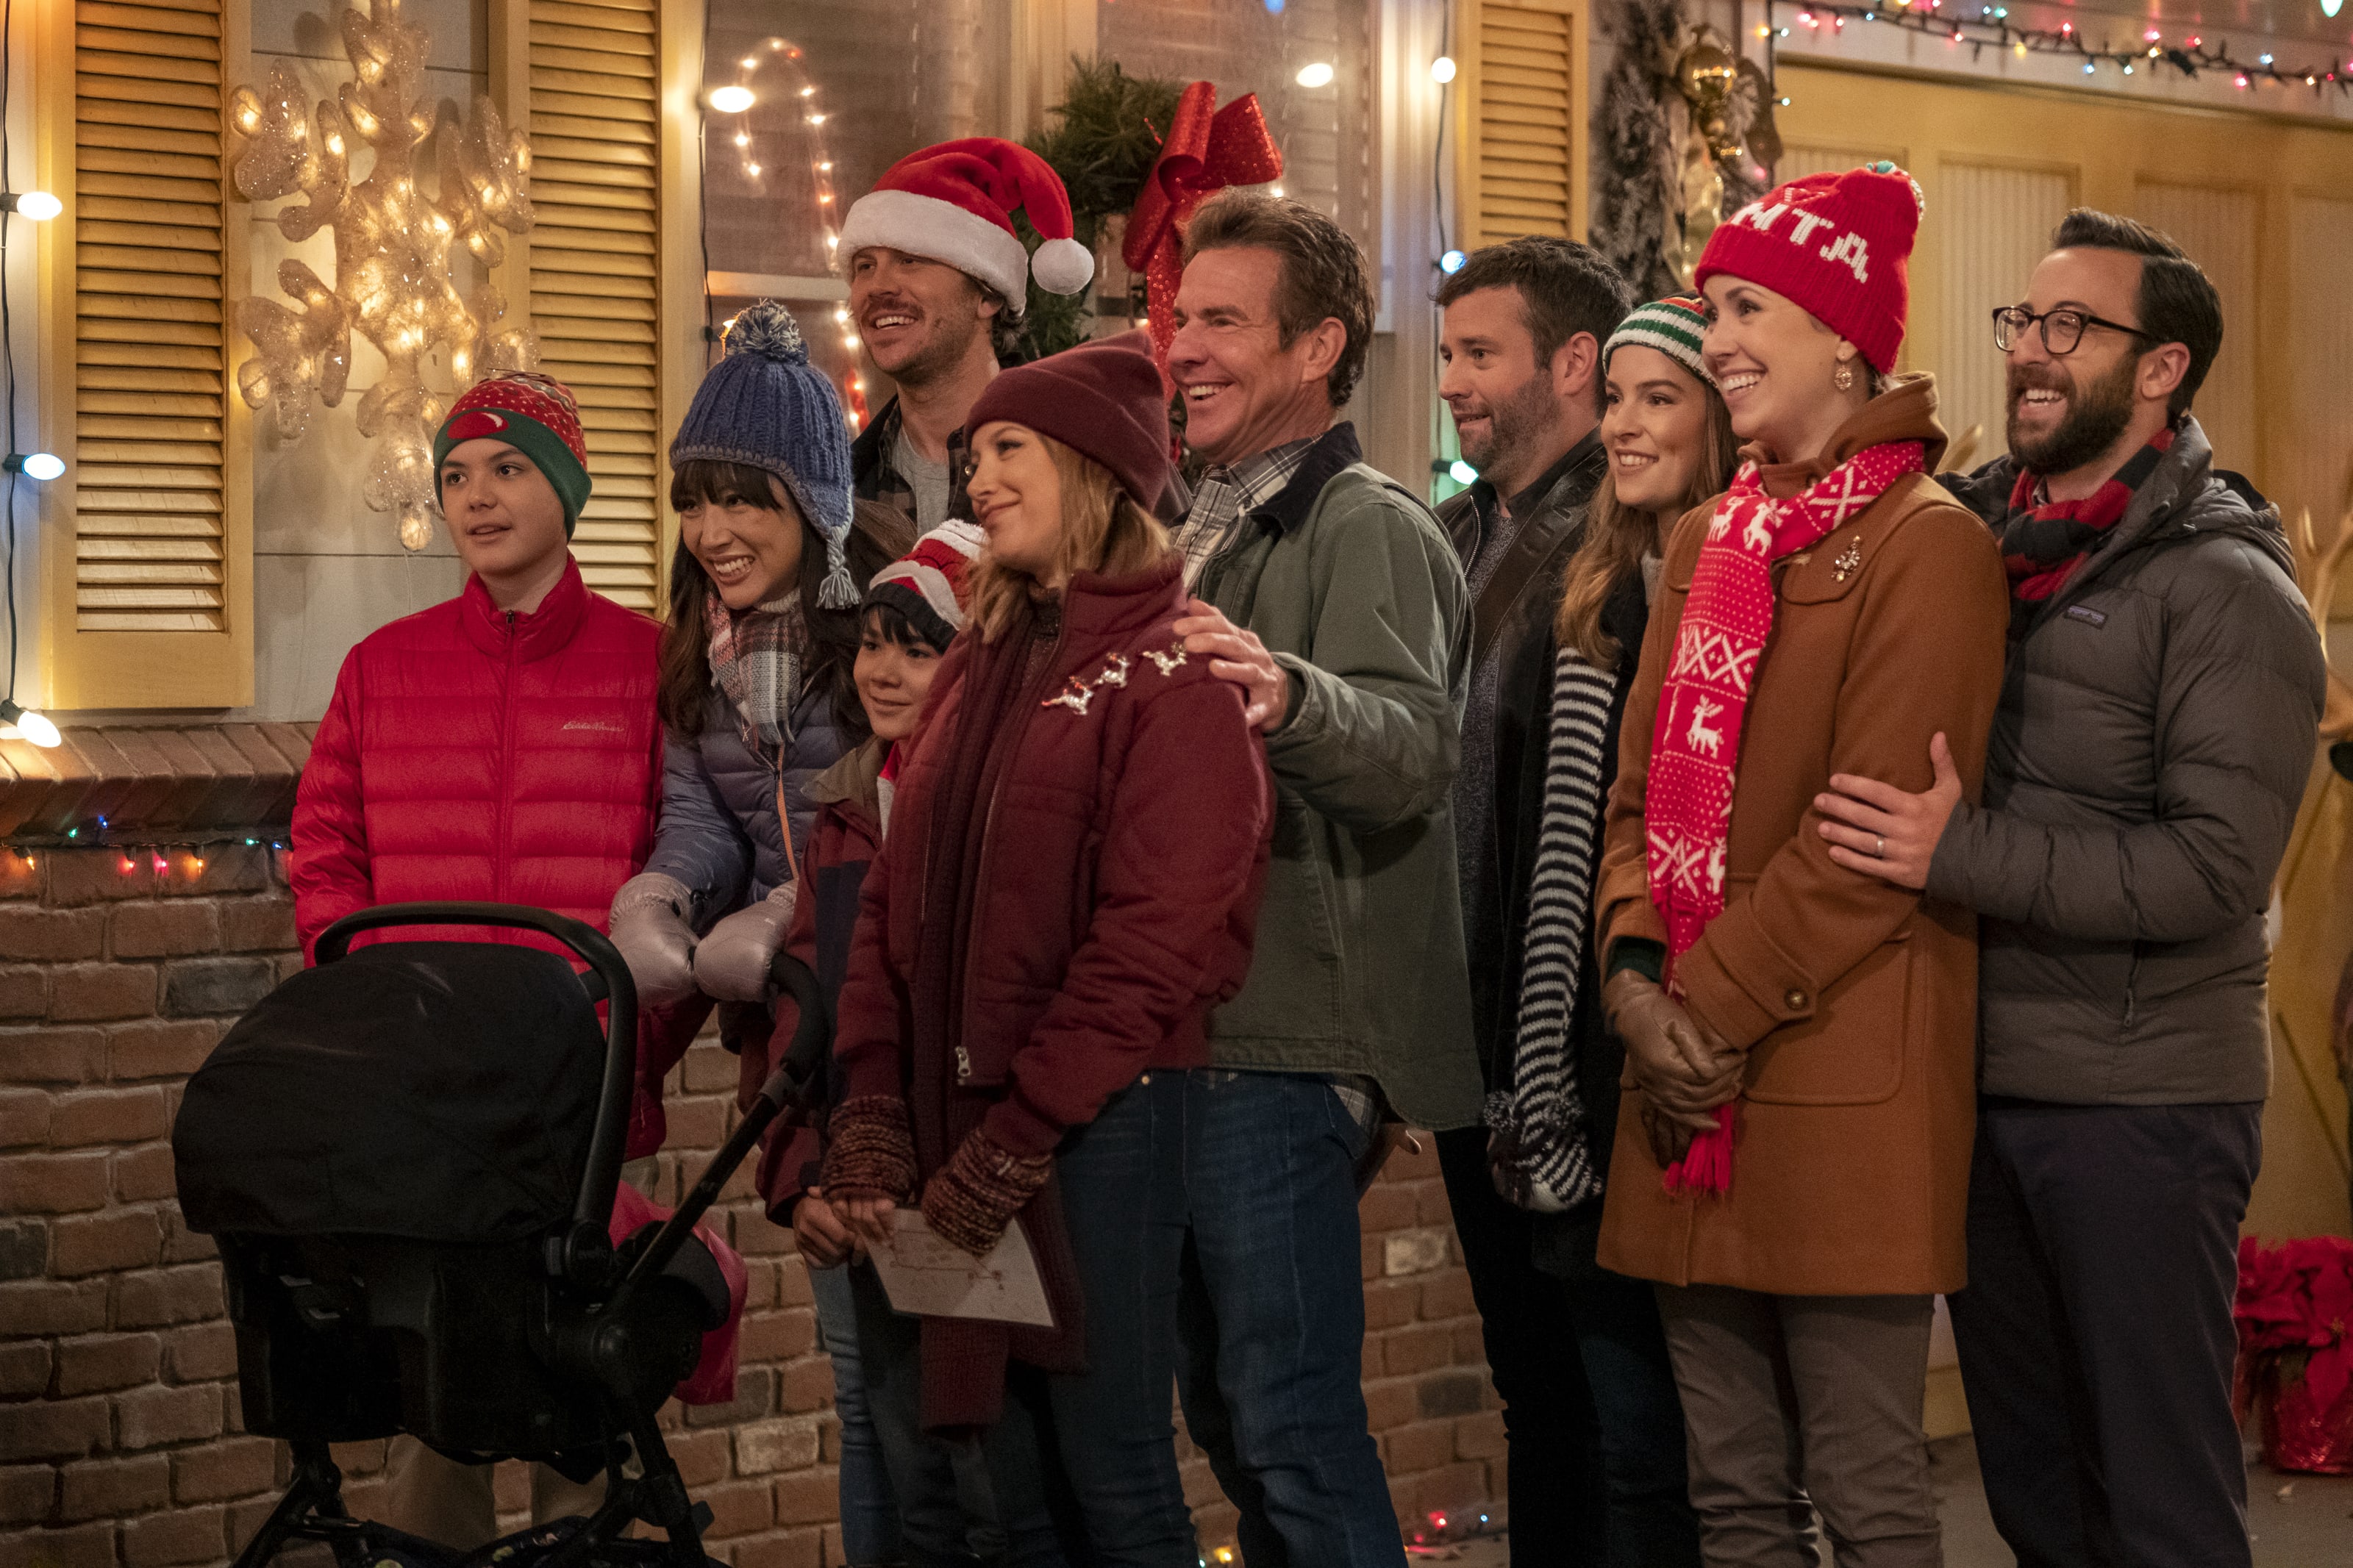 What are the 5 best Christmas shows to stream on Netflix?